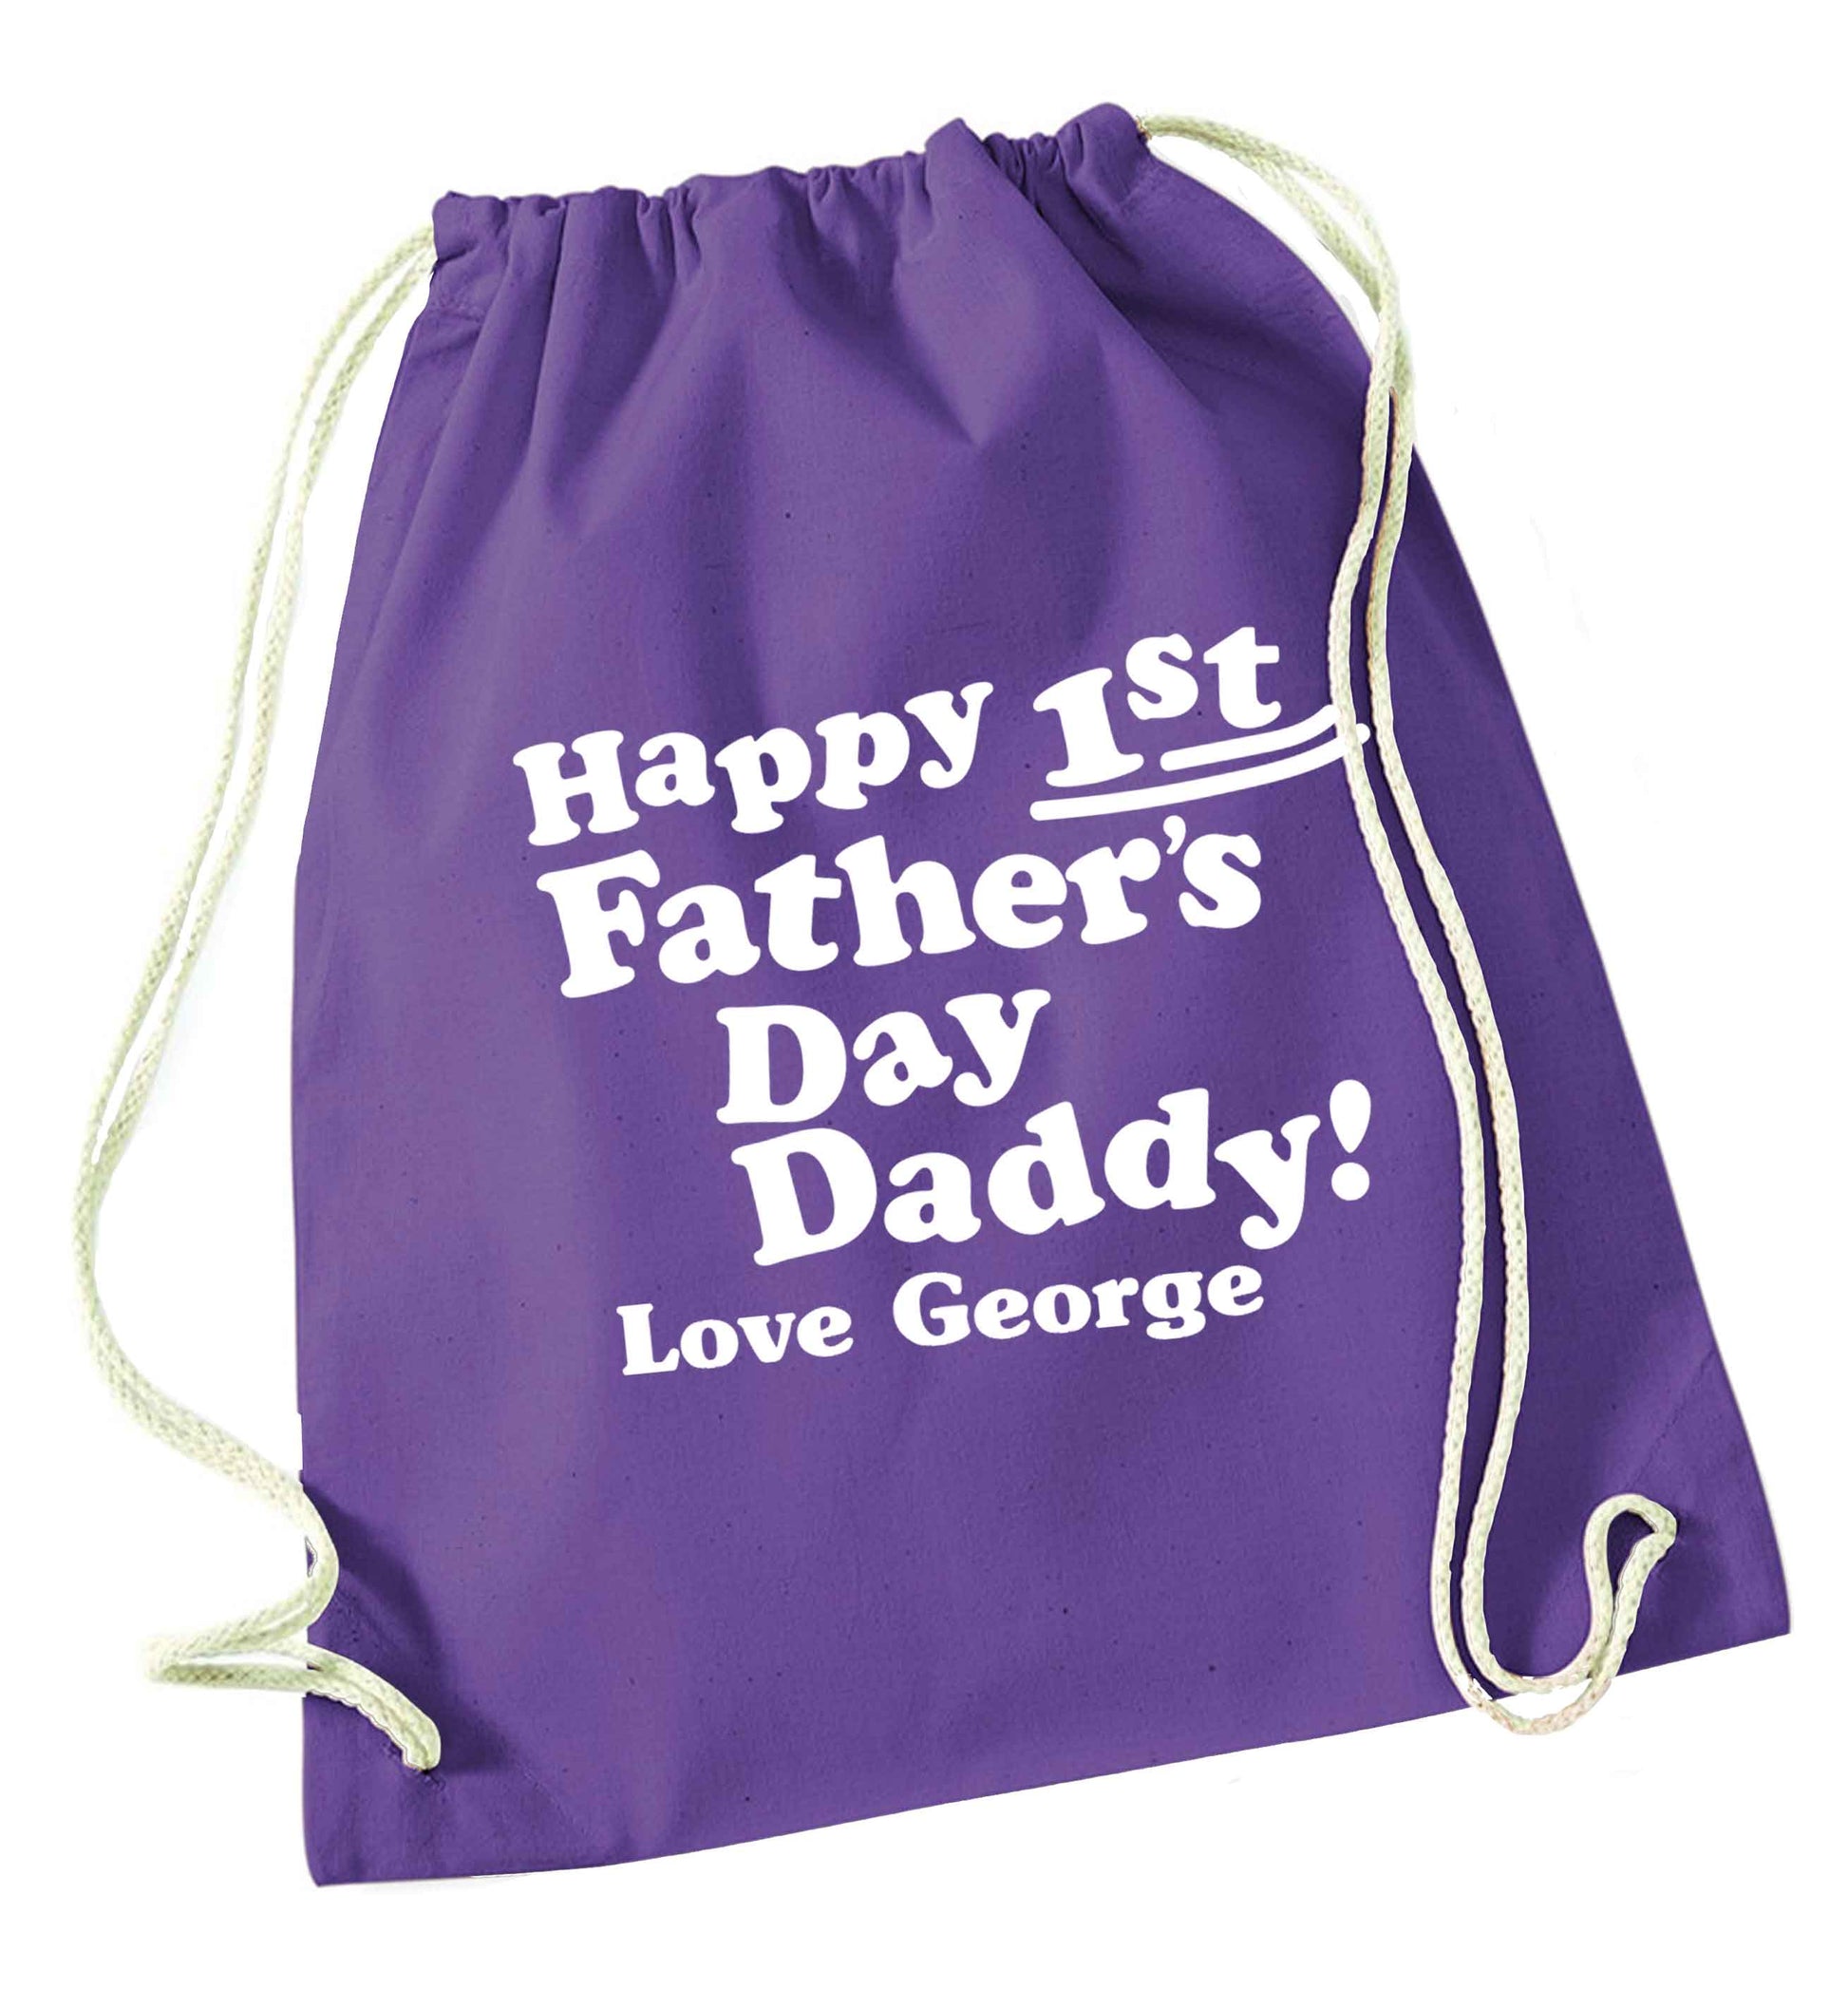 Happy first Fathers Day daddy love personalised purple drawstring bag